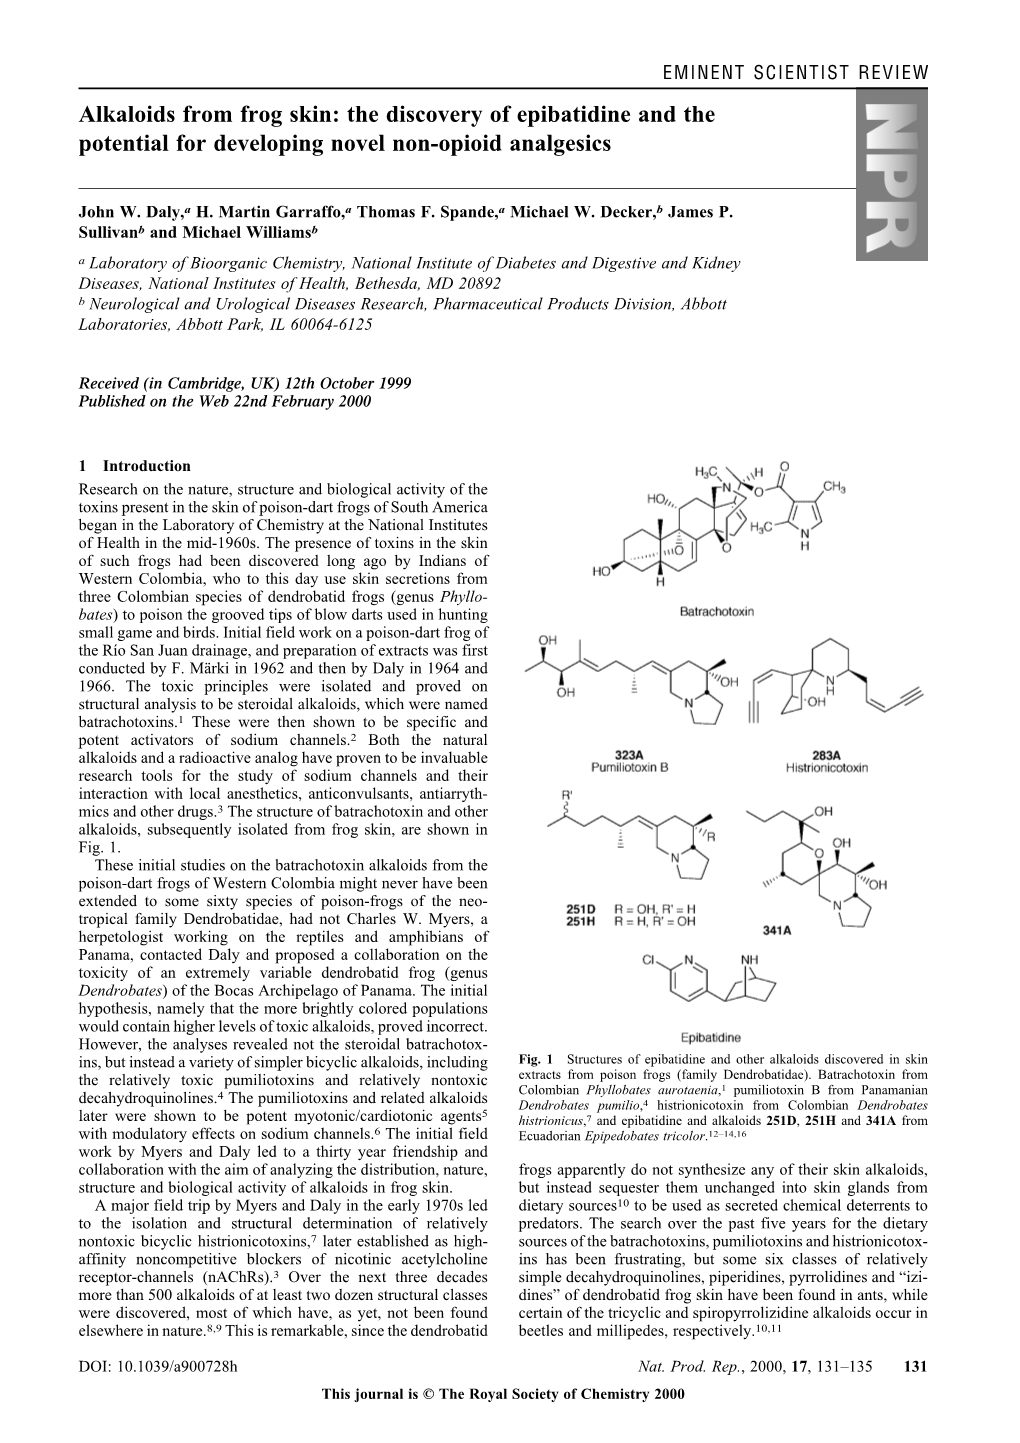 Alkaloids from Frog Skin: the Discovery of Epibatidine and the Potential for Developing Novel Non-Opioid Analgesics